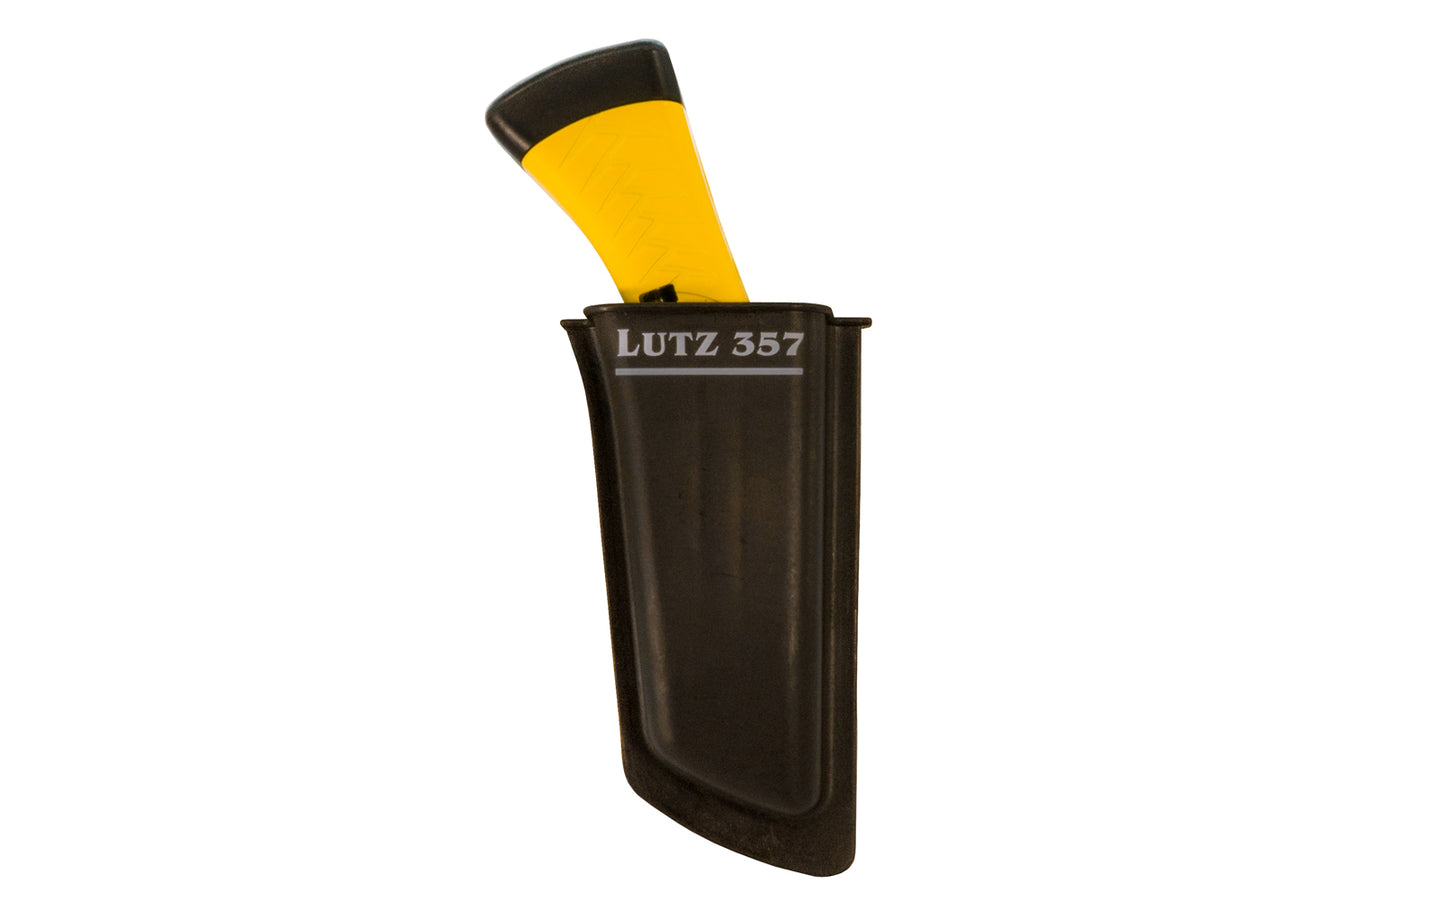 Lutz #357 Quick Change Utility Knife. Metal body with a yellow color. Includes hard plastic holster. Takes heavy duty utility knife blades. Includes hard plastic holster. Metal body - Quick change style utility knife. 052427357014. Body is die cast from zinc for optimum strength & durability. Lutz Model 357